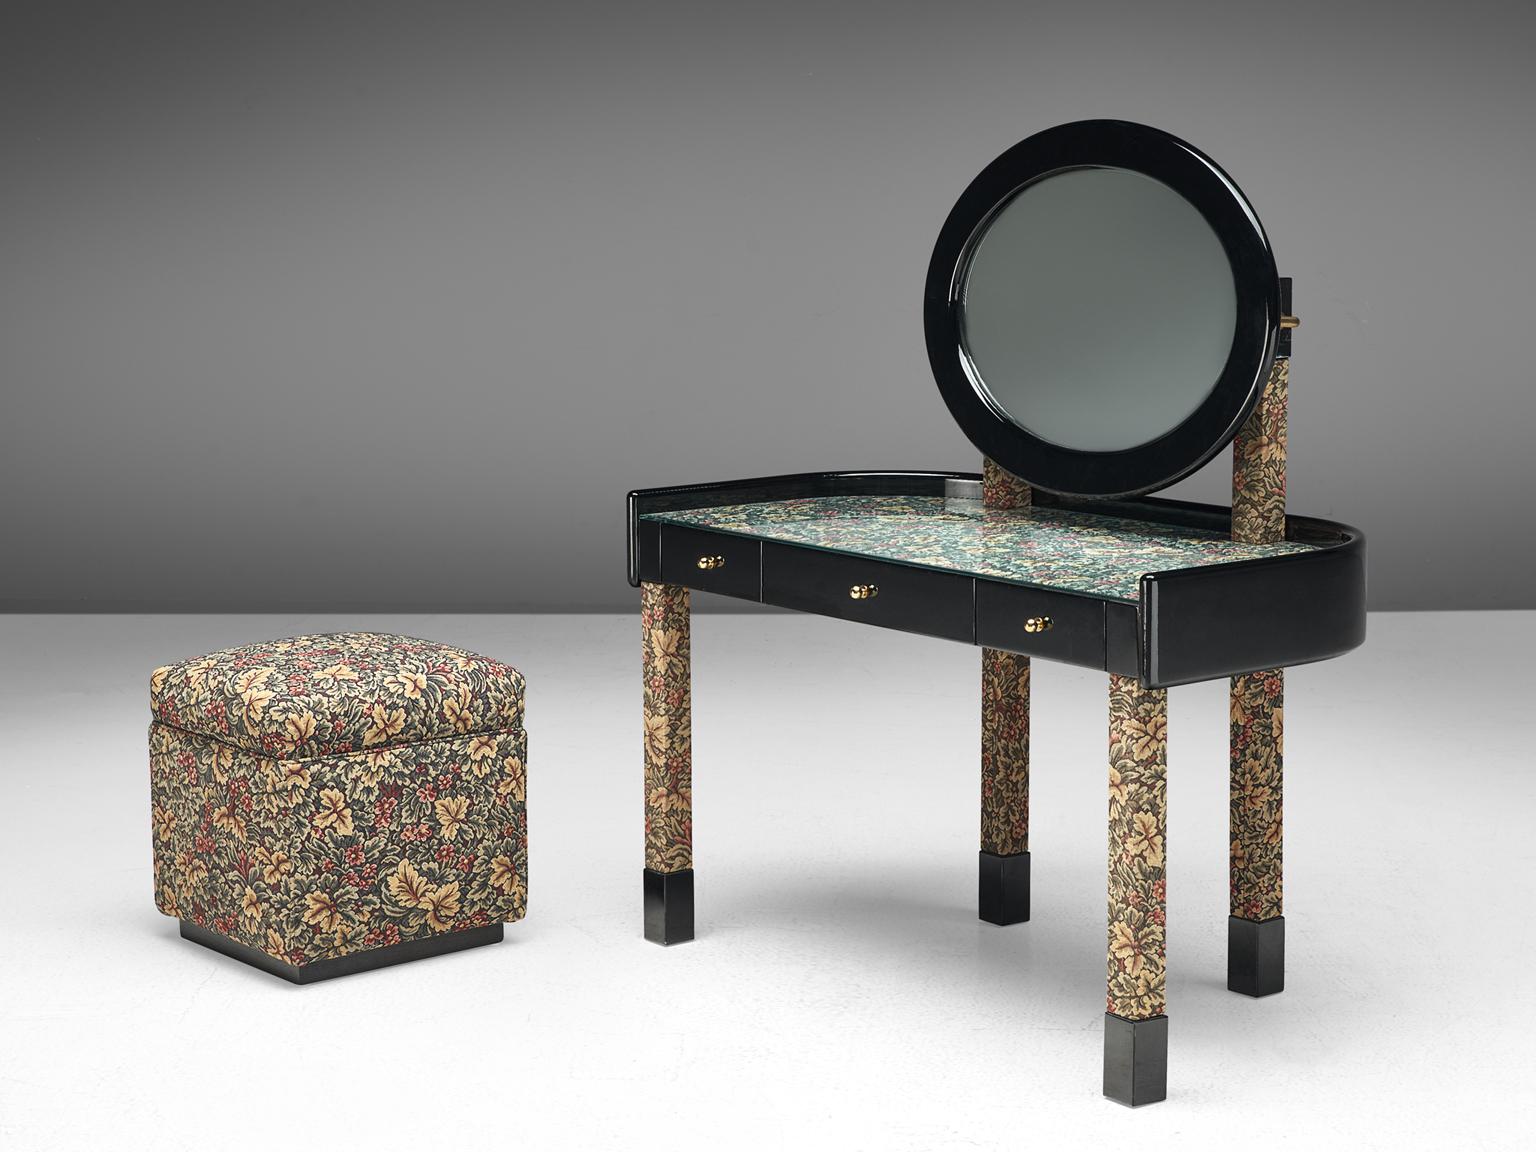 Black lacquered and fabric wrapped vanity/desk with stool by Franco Maria Ricci for SCIC, Italy, circa 1980s.

This rare vanity set was designed by Franco Maria Ricci for SCIC in the 1980s. This Italian piece consist of a small desk with three